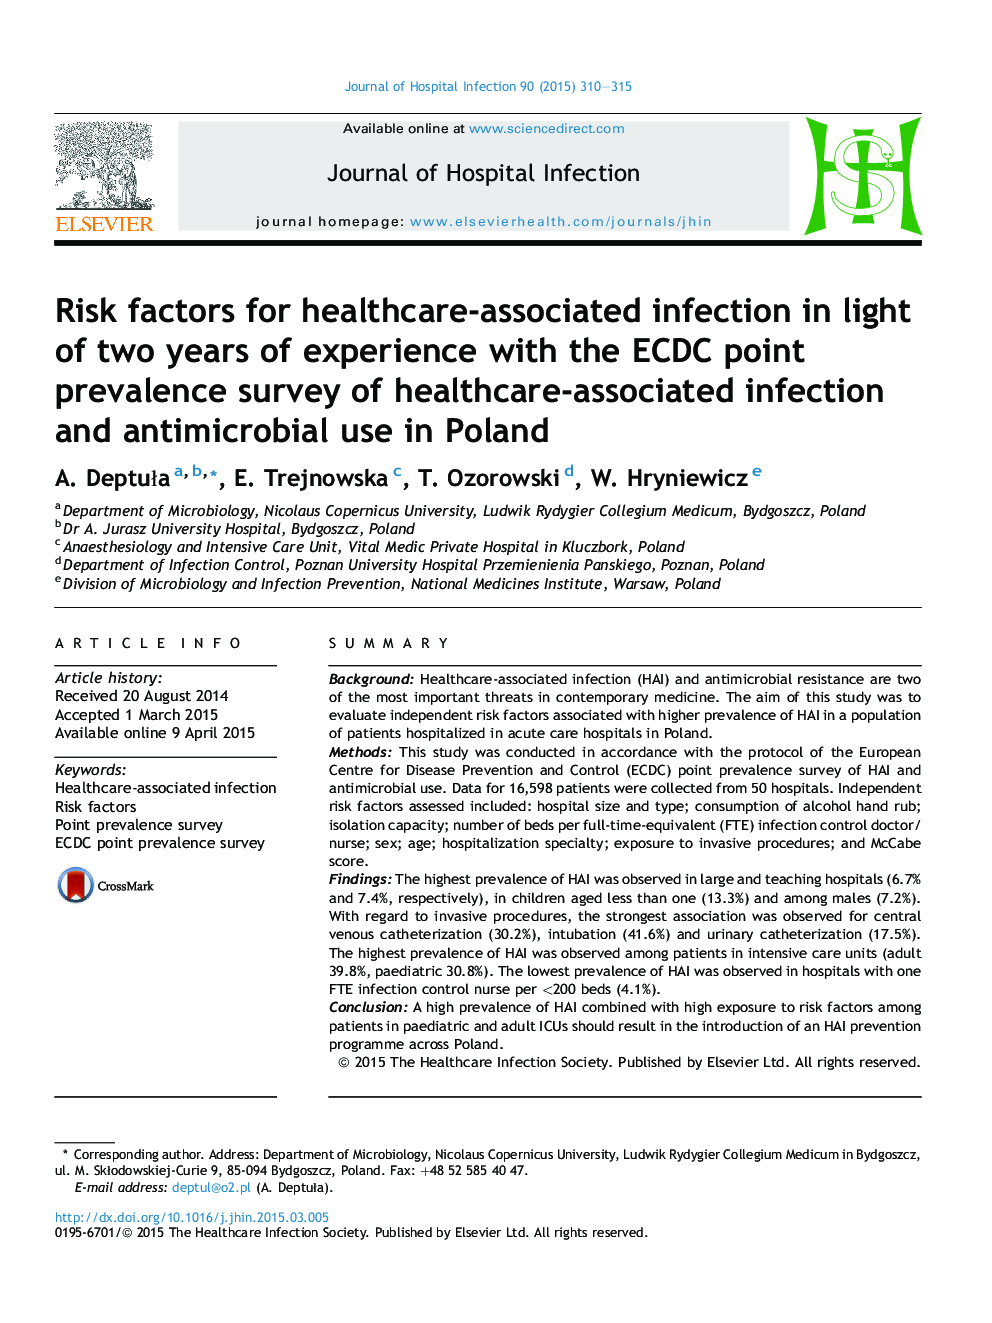 Risk factors for healthcare-associated infection in light of two years of experience with the ECDC point prevalence survey of healthcare-associated infection and antimicrobial use in Poland